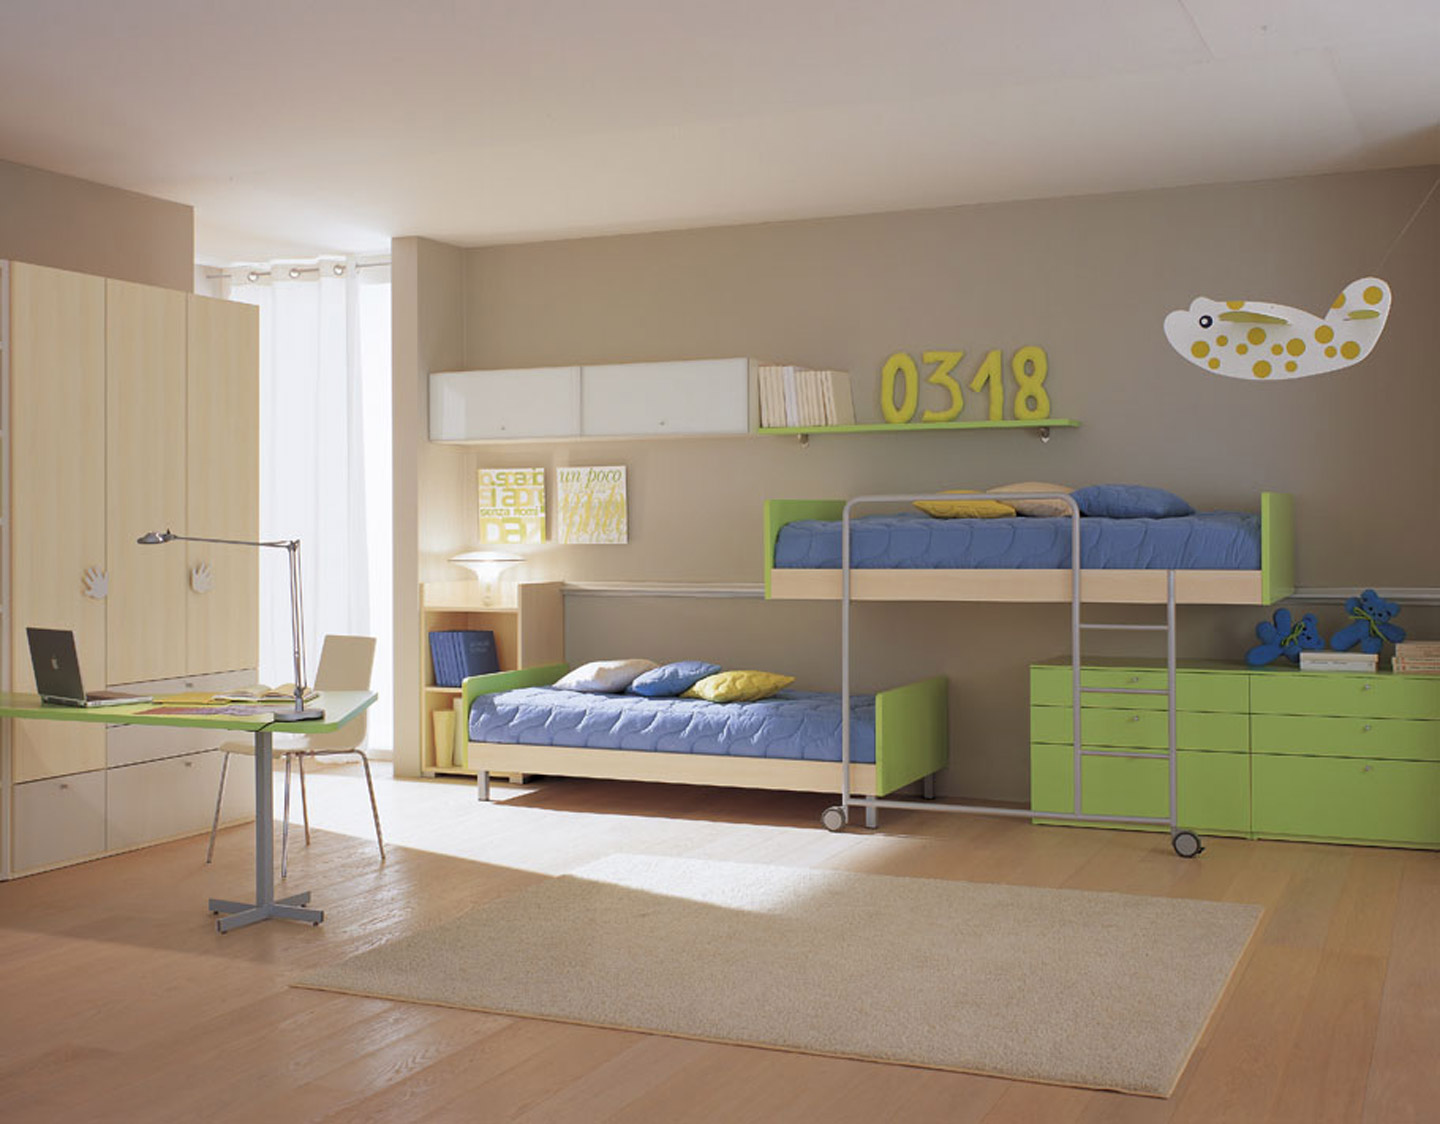 Kids Bedroom Storage Outstanding Kids Bedroom Furniture With Storage For Boys With Creative Wooden Bunk Bed Design And White Thick Fur Carpet IKEA Plus Traditional Light Wood Flooring Ideas Furniture Choosing The Kids Bedroom Furniture